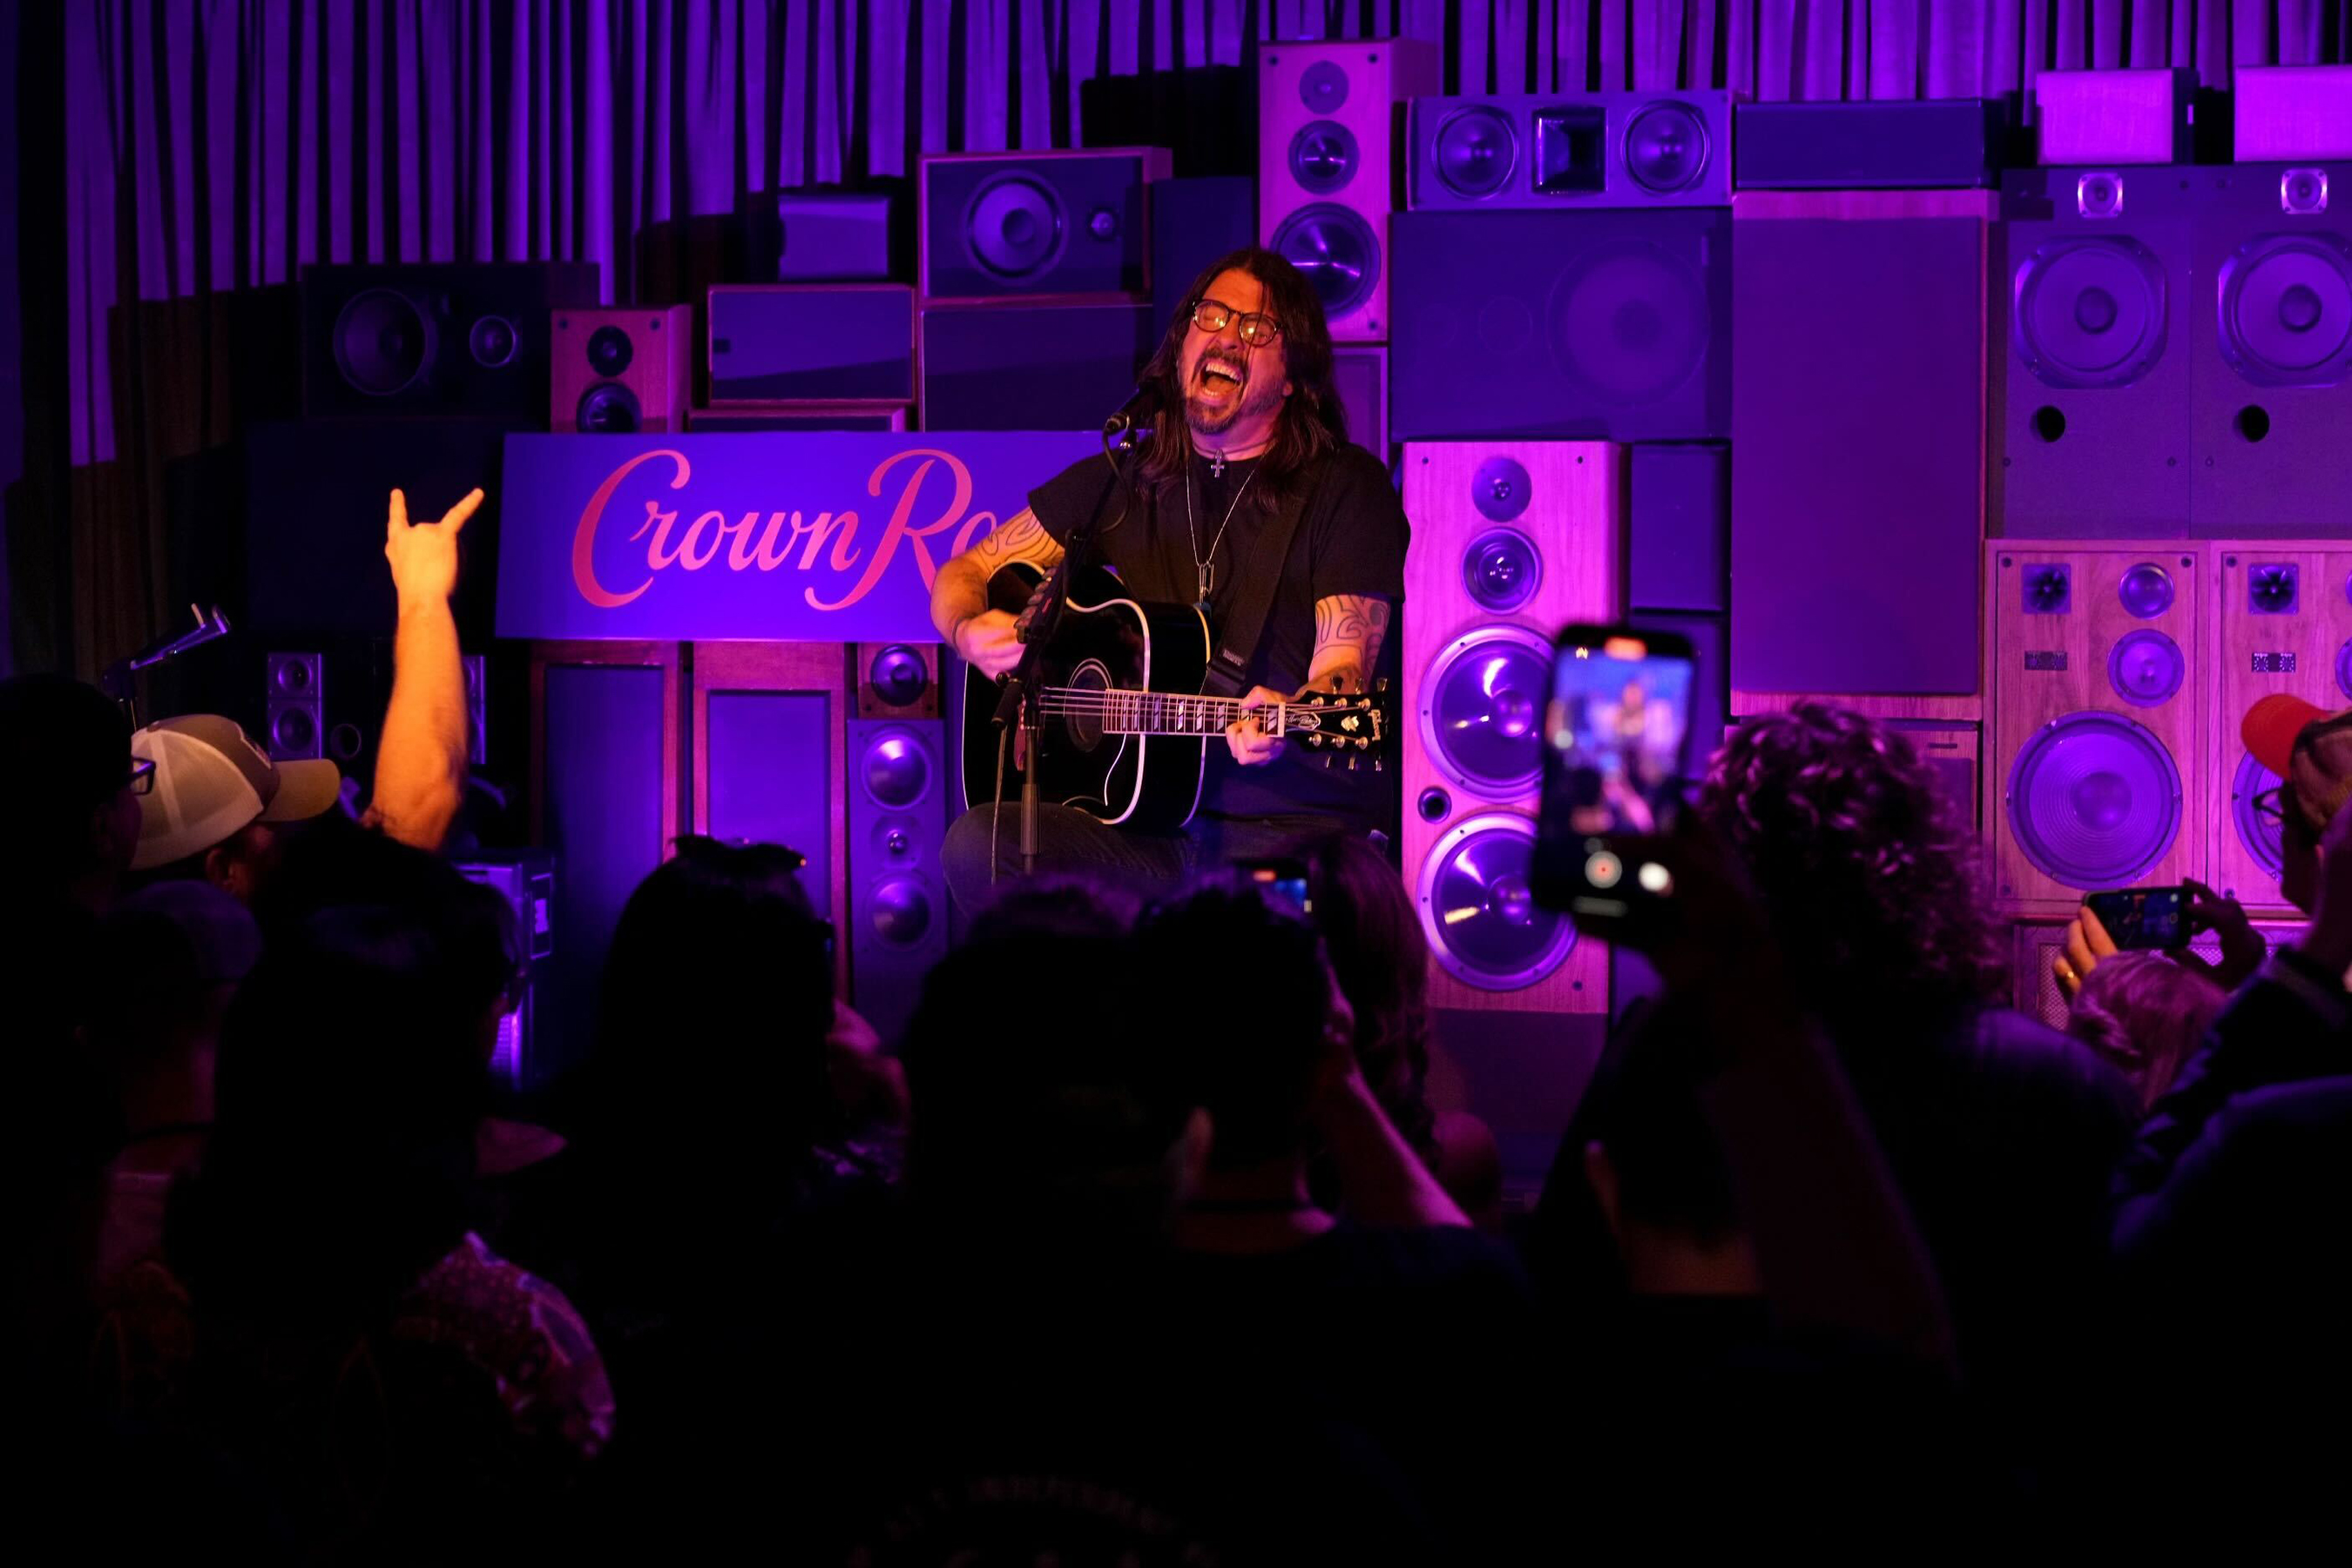 Dave Grohl kicked off Super Bowl weekend with an exclusive acoustic performance for veterans at Crown Royal’s pre-game party experience in Phoenix, Arizona.